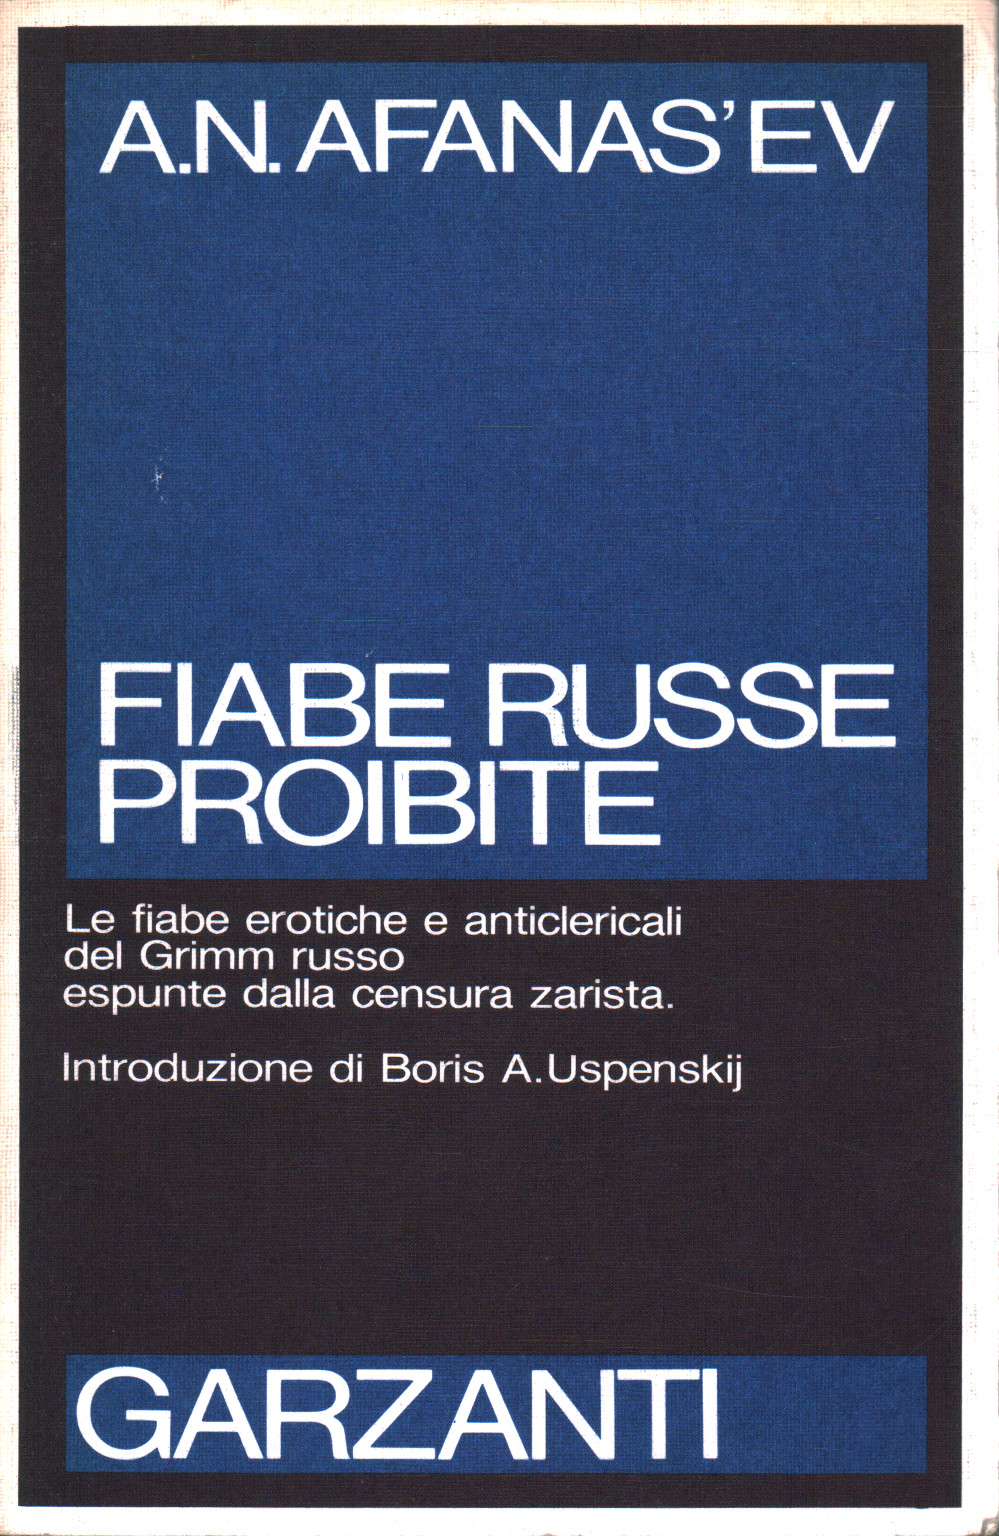 Fiabe russe proibite, s.a.